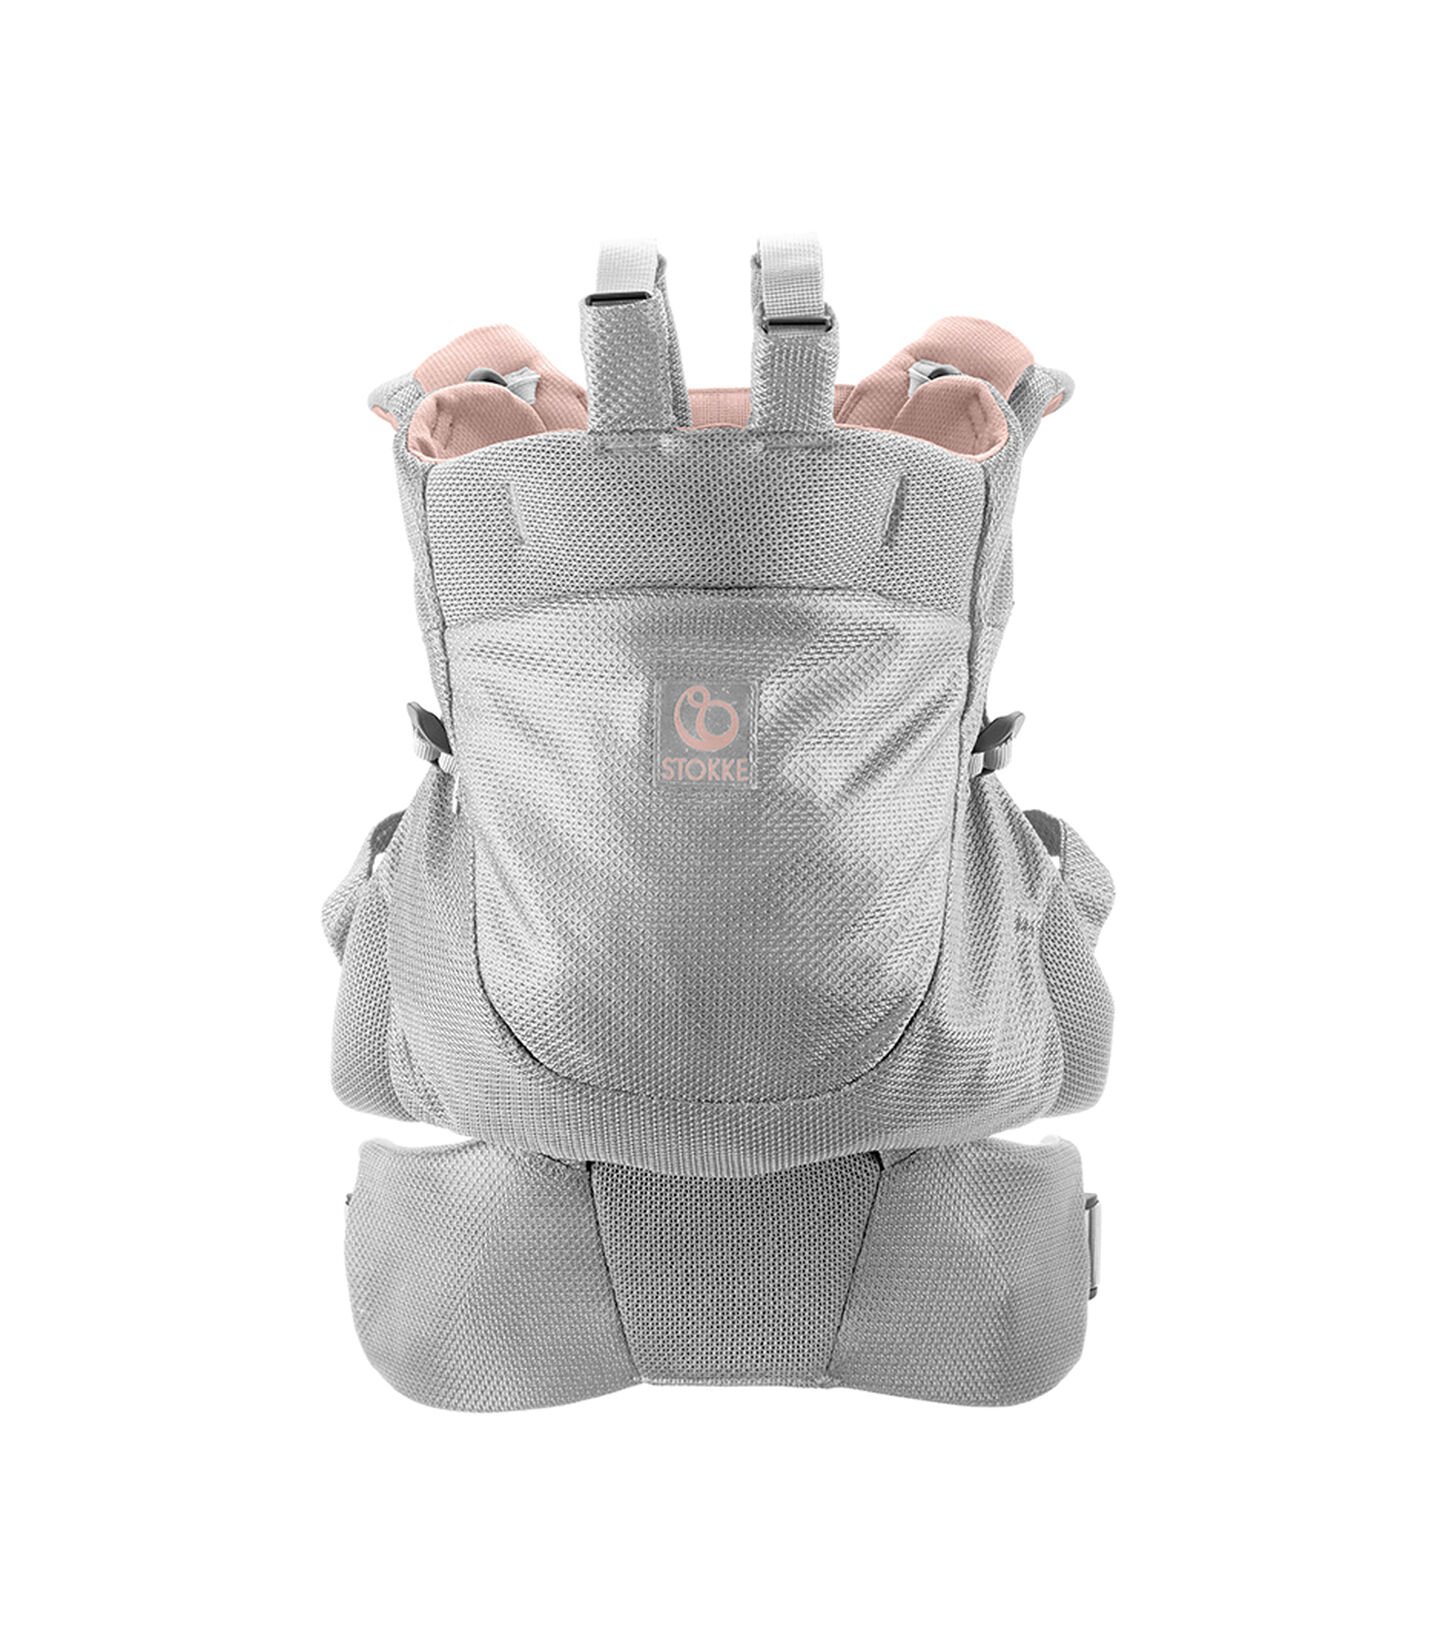 Nosidło tylne Stokke® MyCarrier™ Pink Mesh, Pink Mesh, mainview view 1